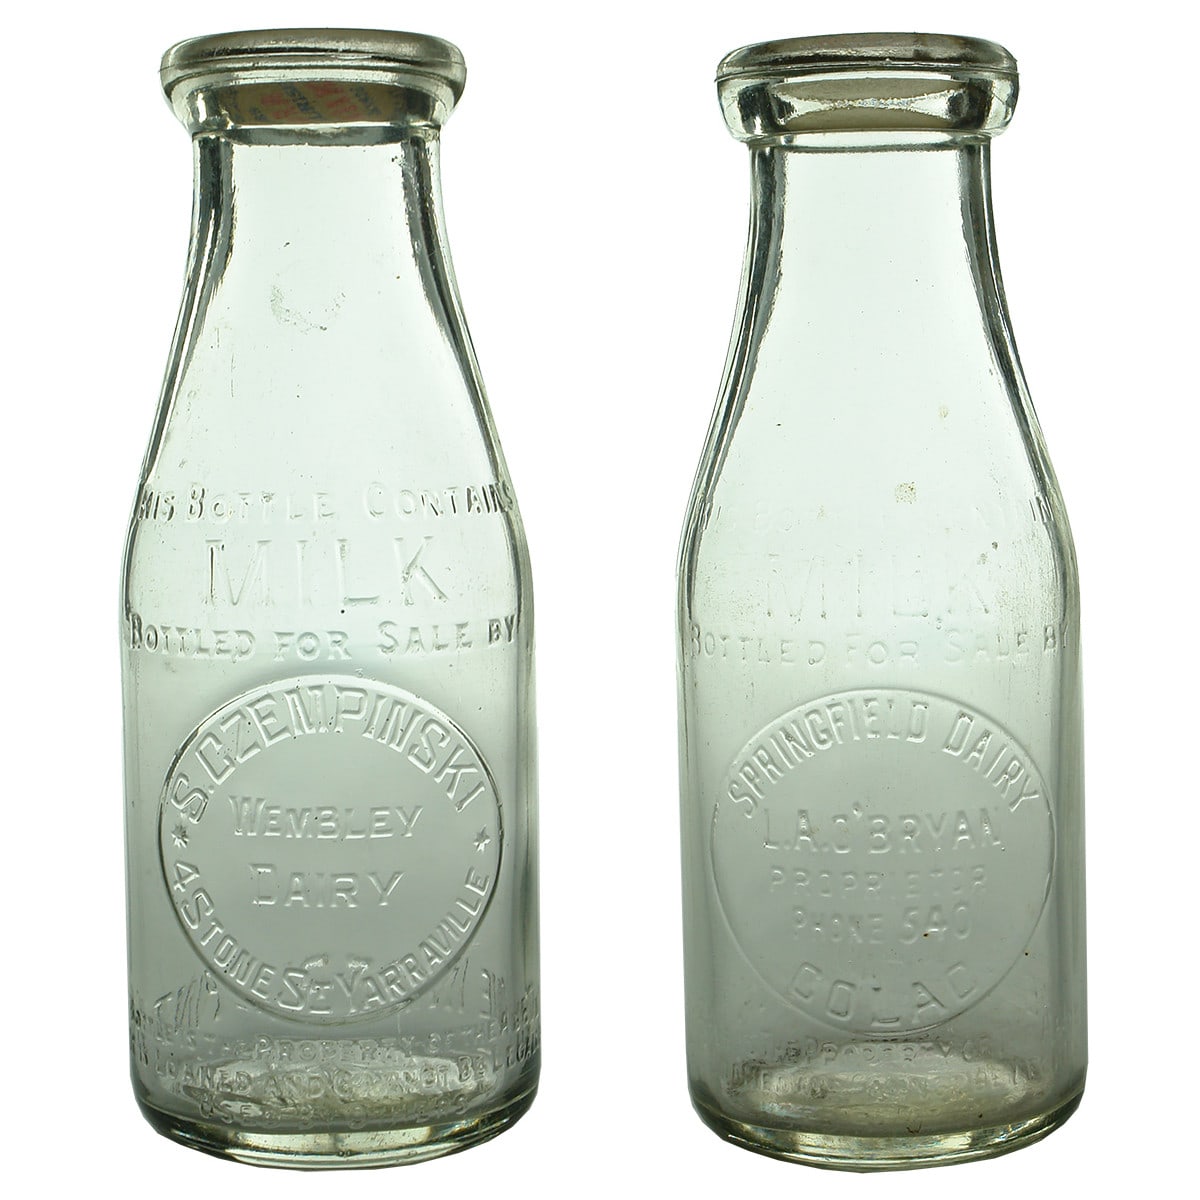 Two Milk Bottles: S. Czempinski, Yarraville and L. A. O'Bryan, Colac. (Victoria)